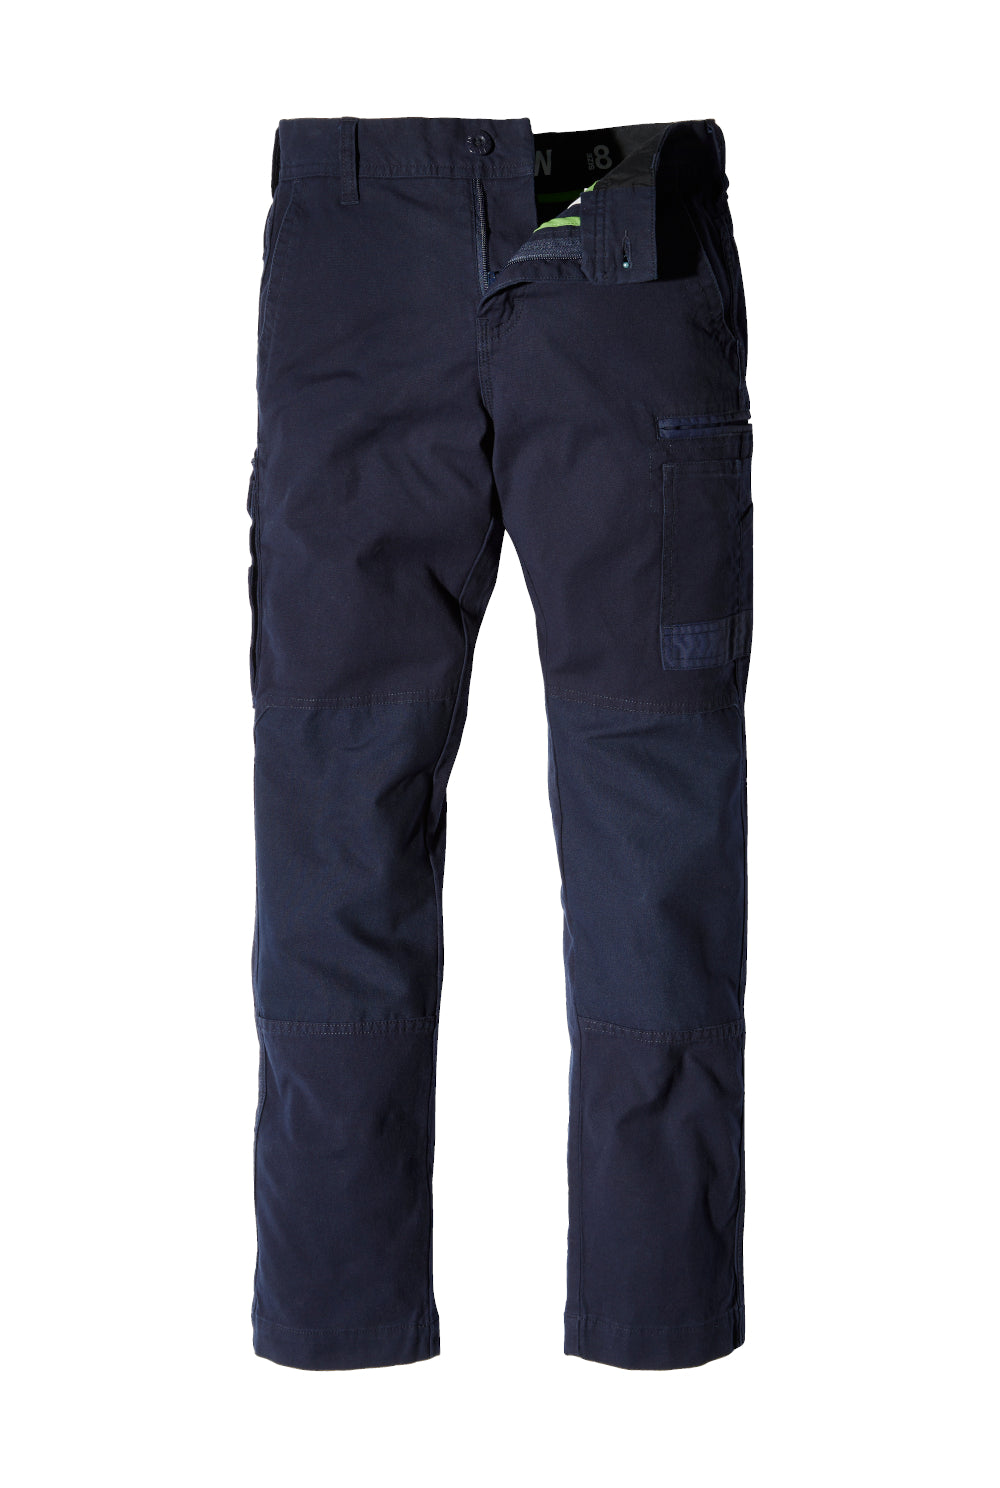 WP-3 FXD Womens Stretch Work Pant